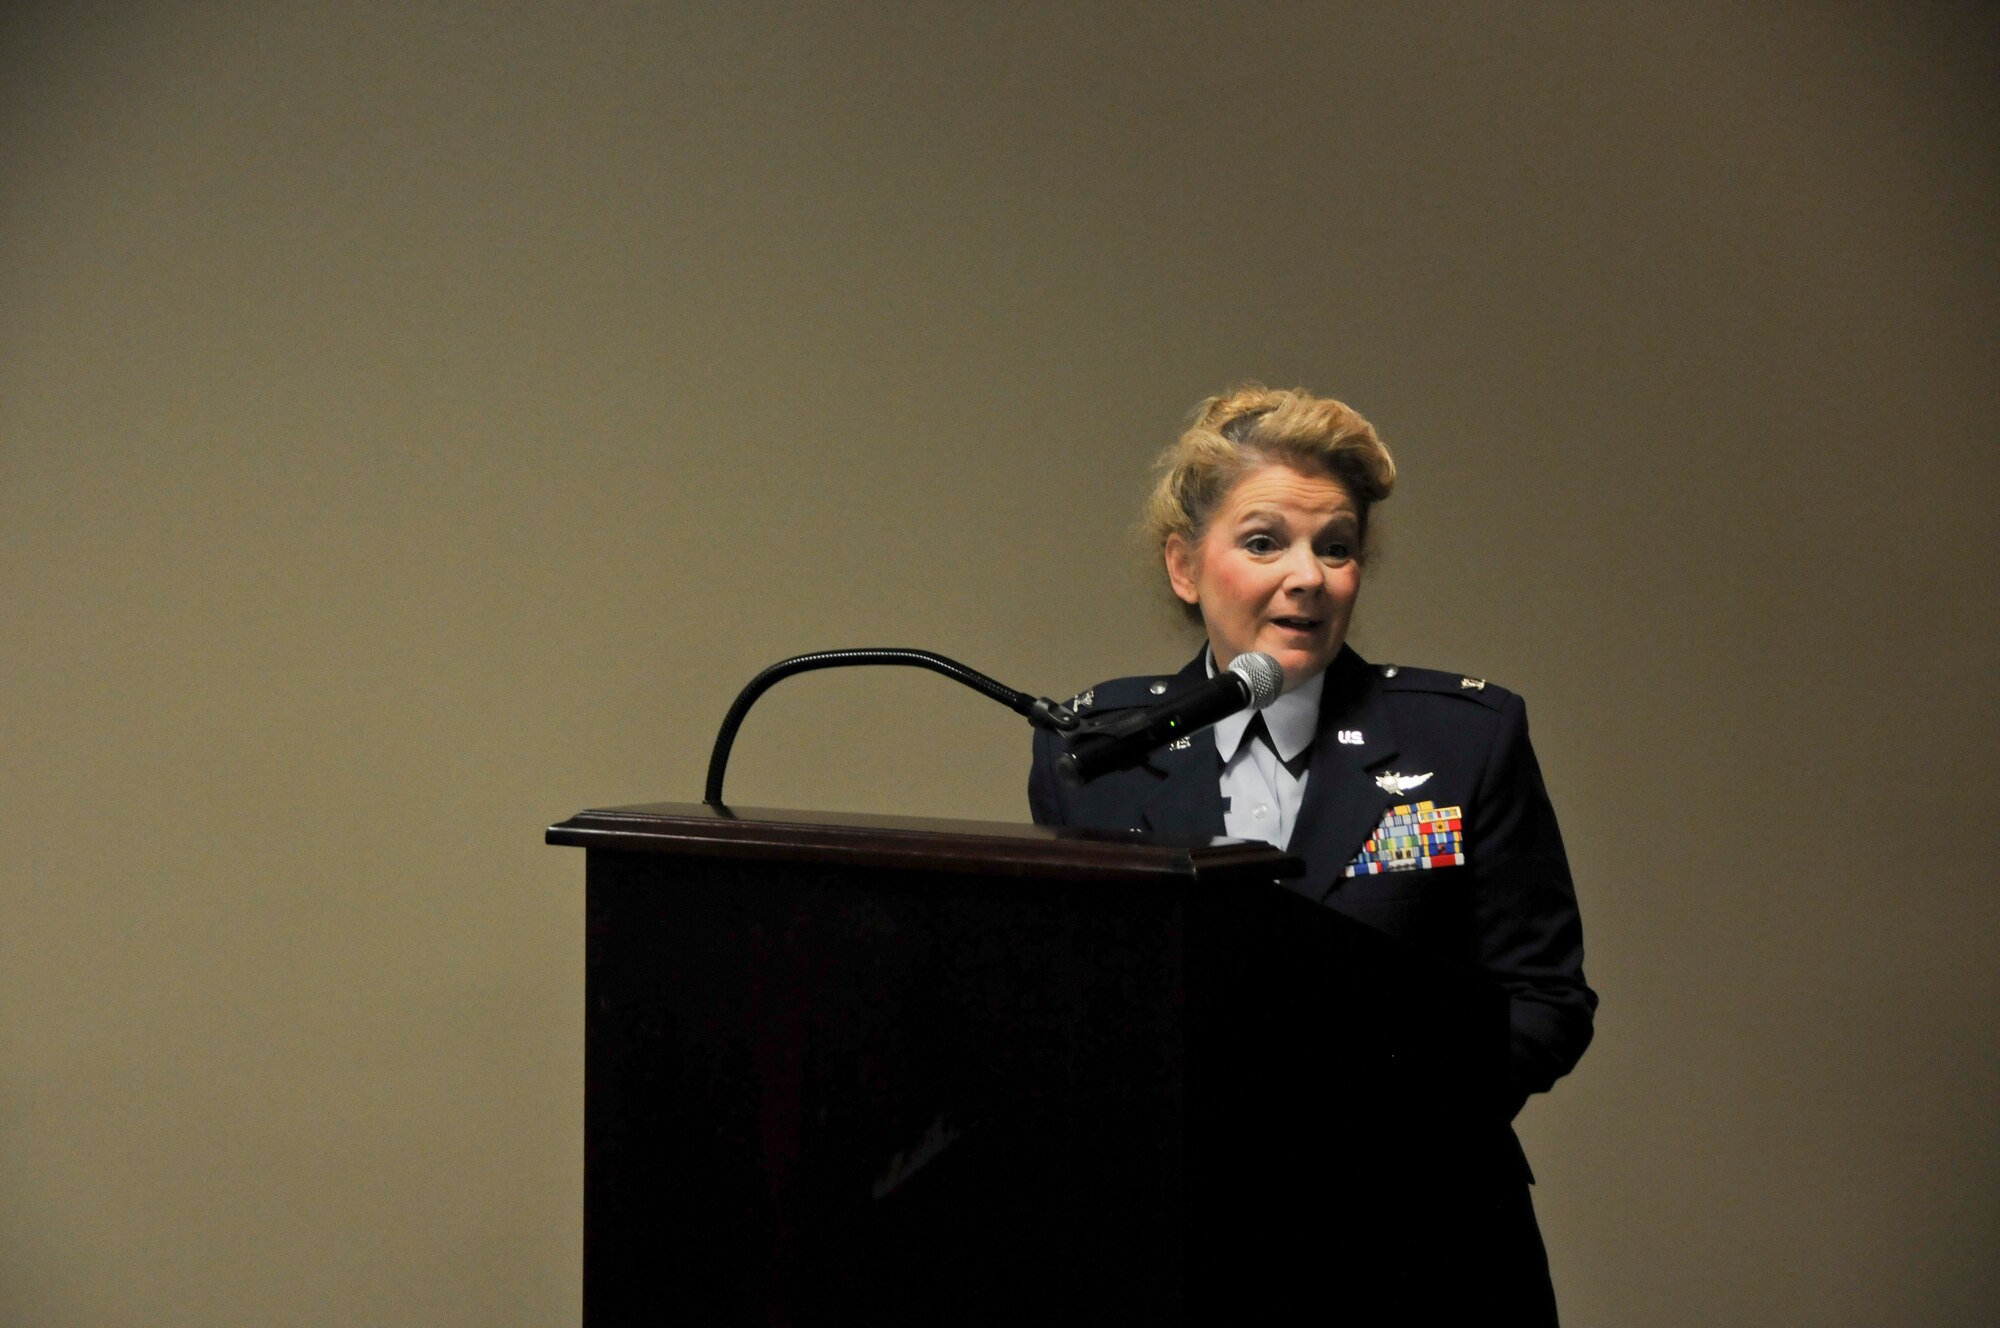 Col. Tenise Gardner, 188th Mission Support Group commander, speaks about the credentials of Maj. Micheal Howard at Ebbing Air National Guard Base, Fort Smith, Ark., during Howard’s assumption of command of the 188th Civil Engineer Squadron Aug. 1, 2015. As the 188th MSG commander, Gardner leads the 188th CES, 188th Security Forces Squadron, 188th Force Support Squadron, 188th Logistics Readiness Squadron and the 188th Communications Flight. (U.S. Air National Guard photo by Senior Airman Cody Martin/Released)